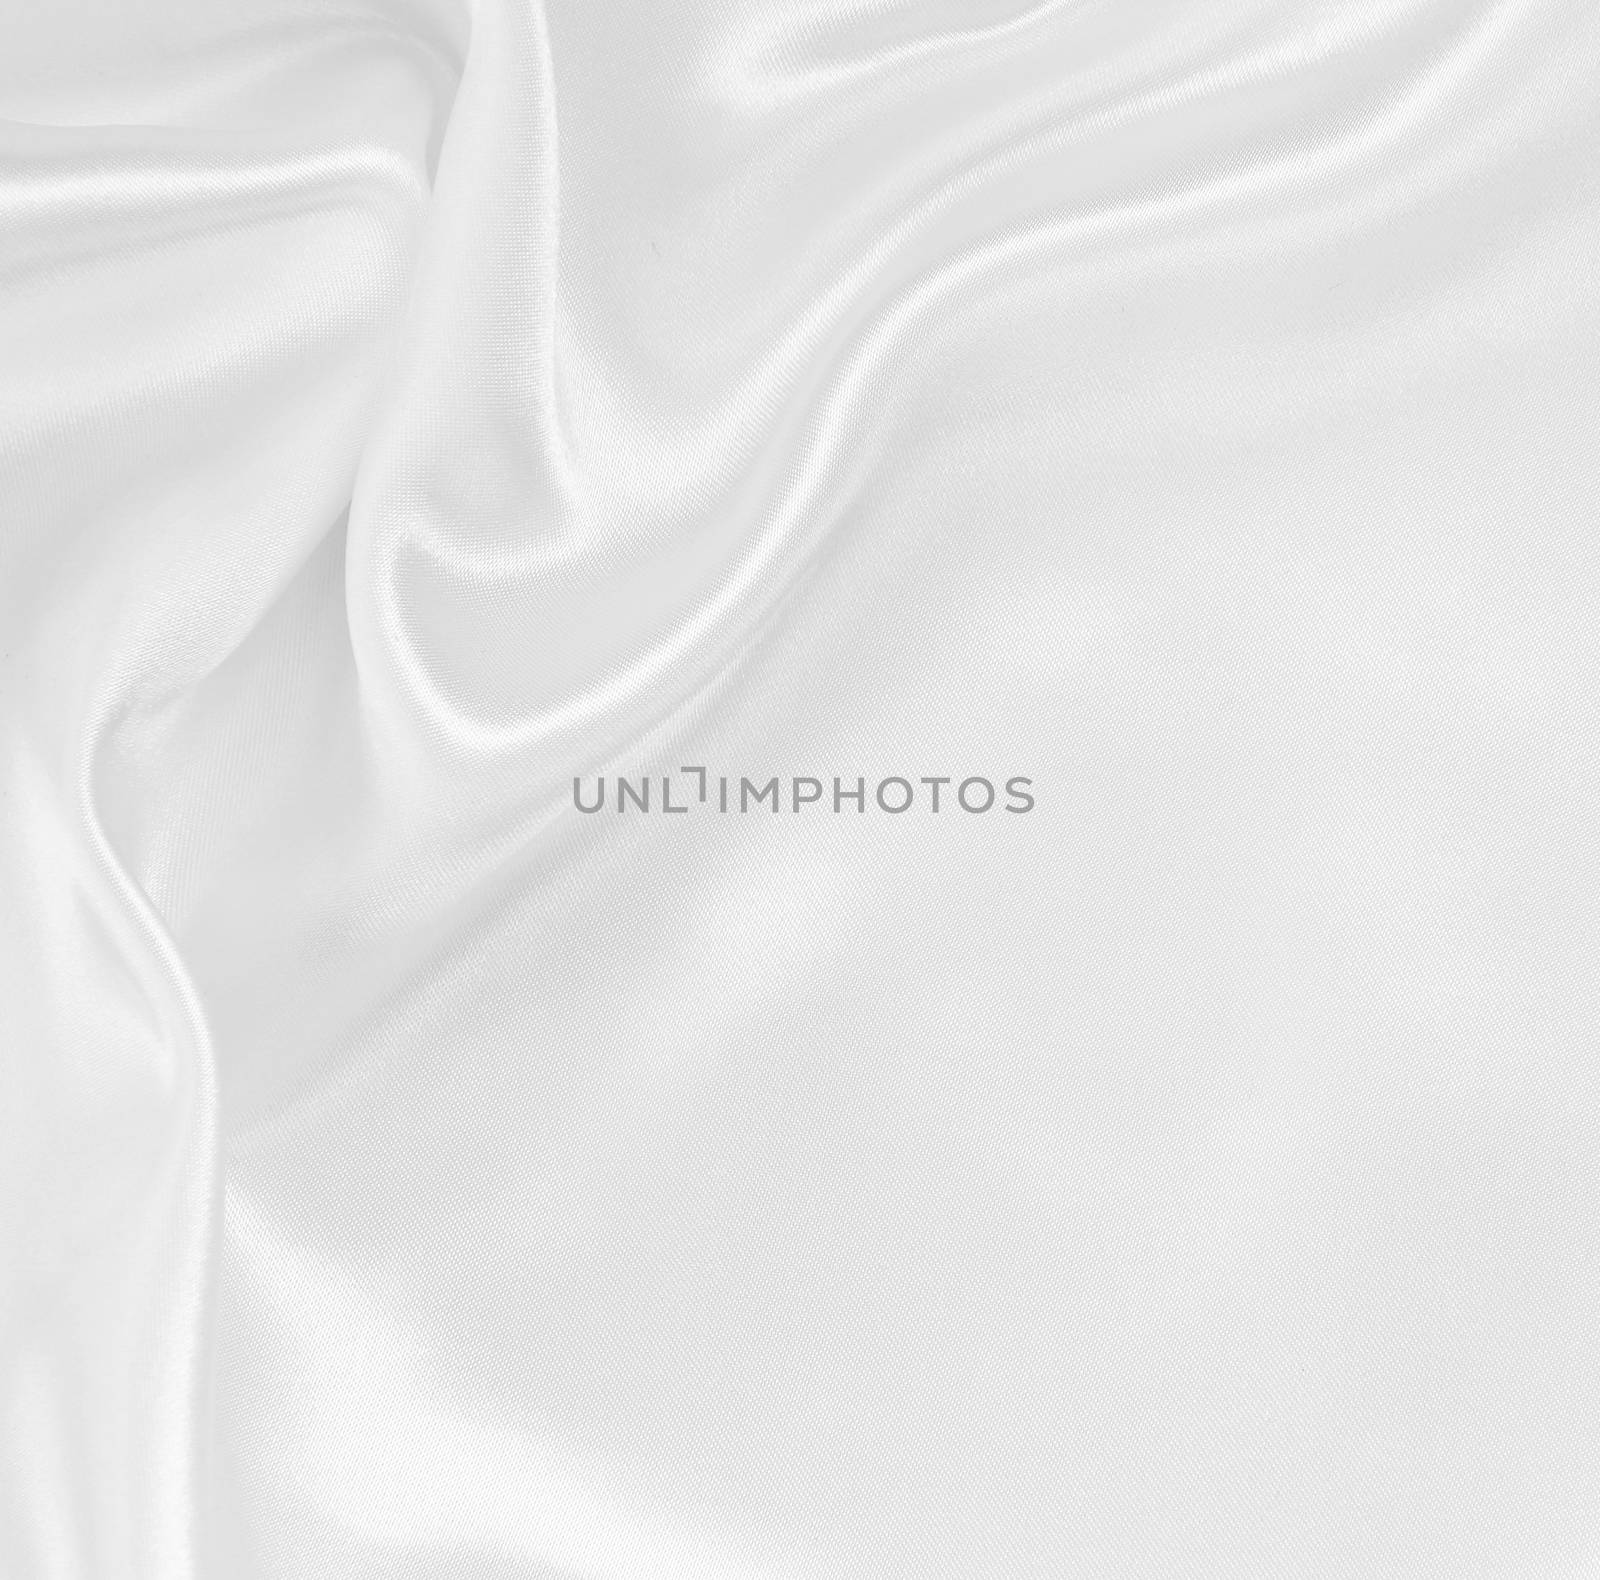 Smooth elegant white silk or satin texture can use as wedding background